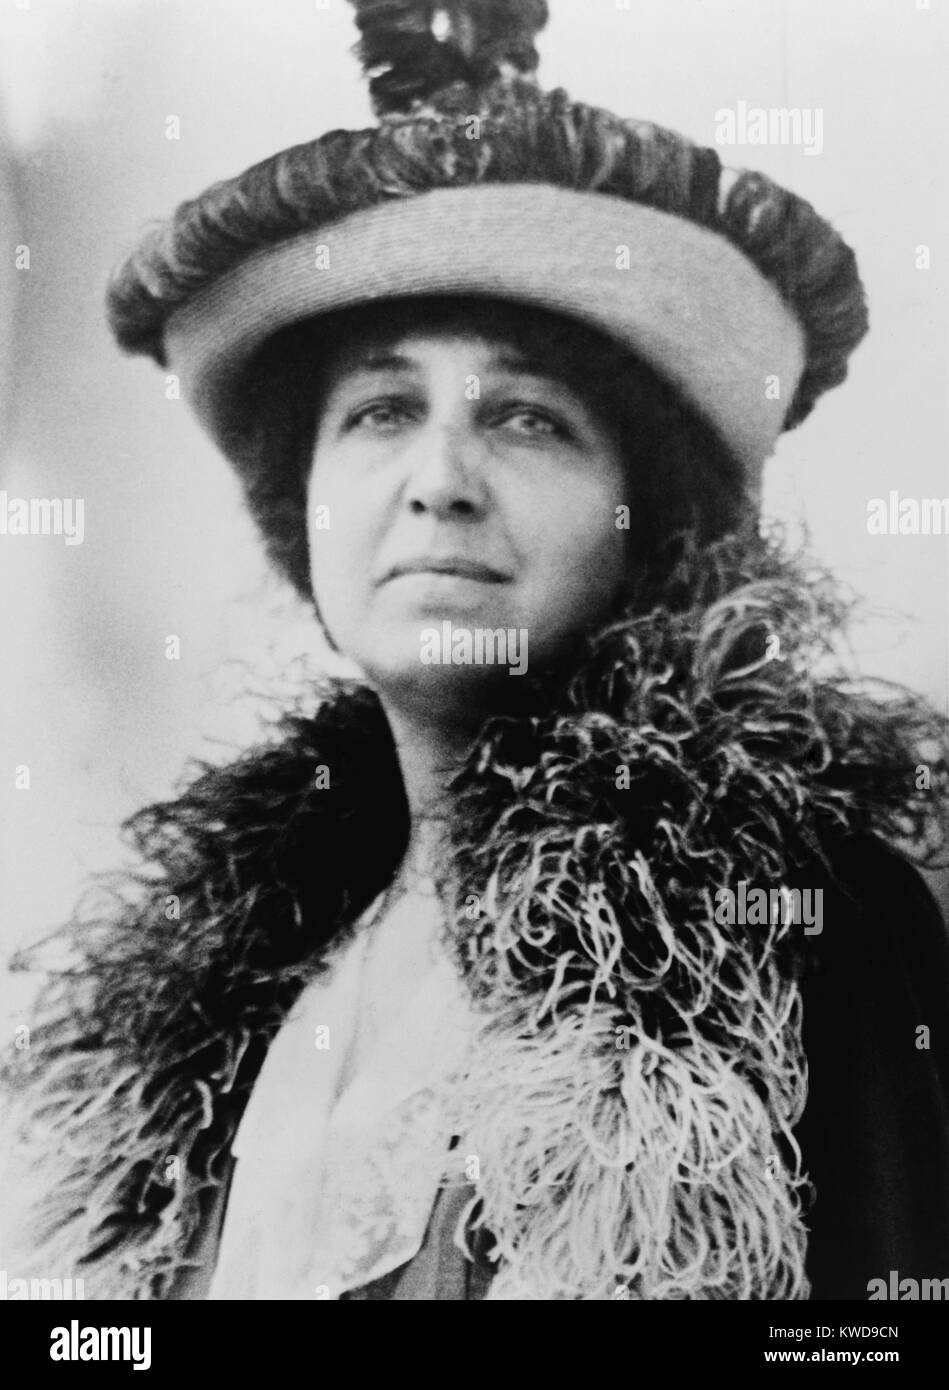 Katharine Dexter McCormick, suffragette and birth control advocate, ca. 1915-25. With inherited wealth she funded Gregory Pincus’ development of the birth control pill. She also funded construction of women's dormitories at MIT to encourage females attendance (BSLOC 2016 10 14) Stock Photo